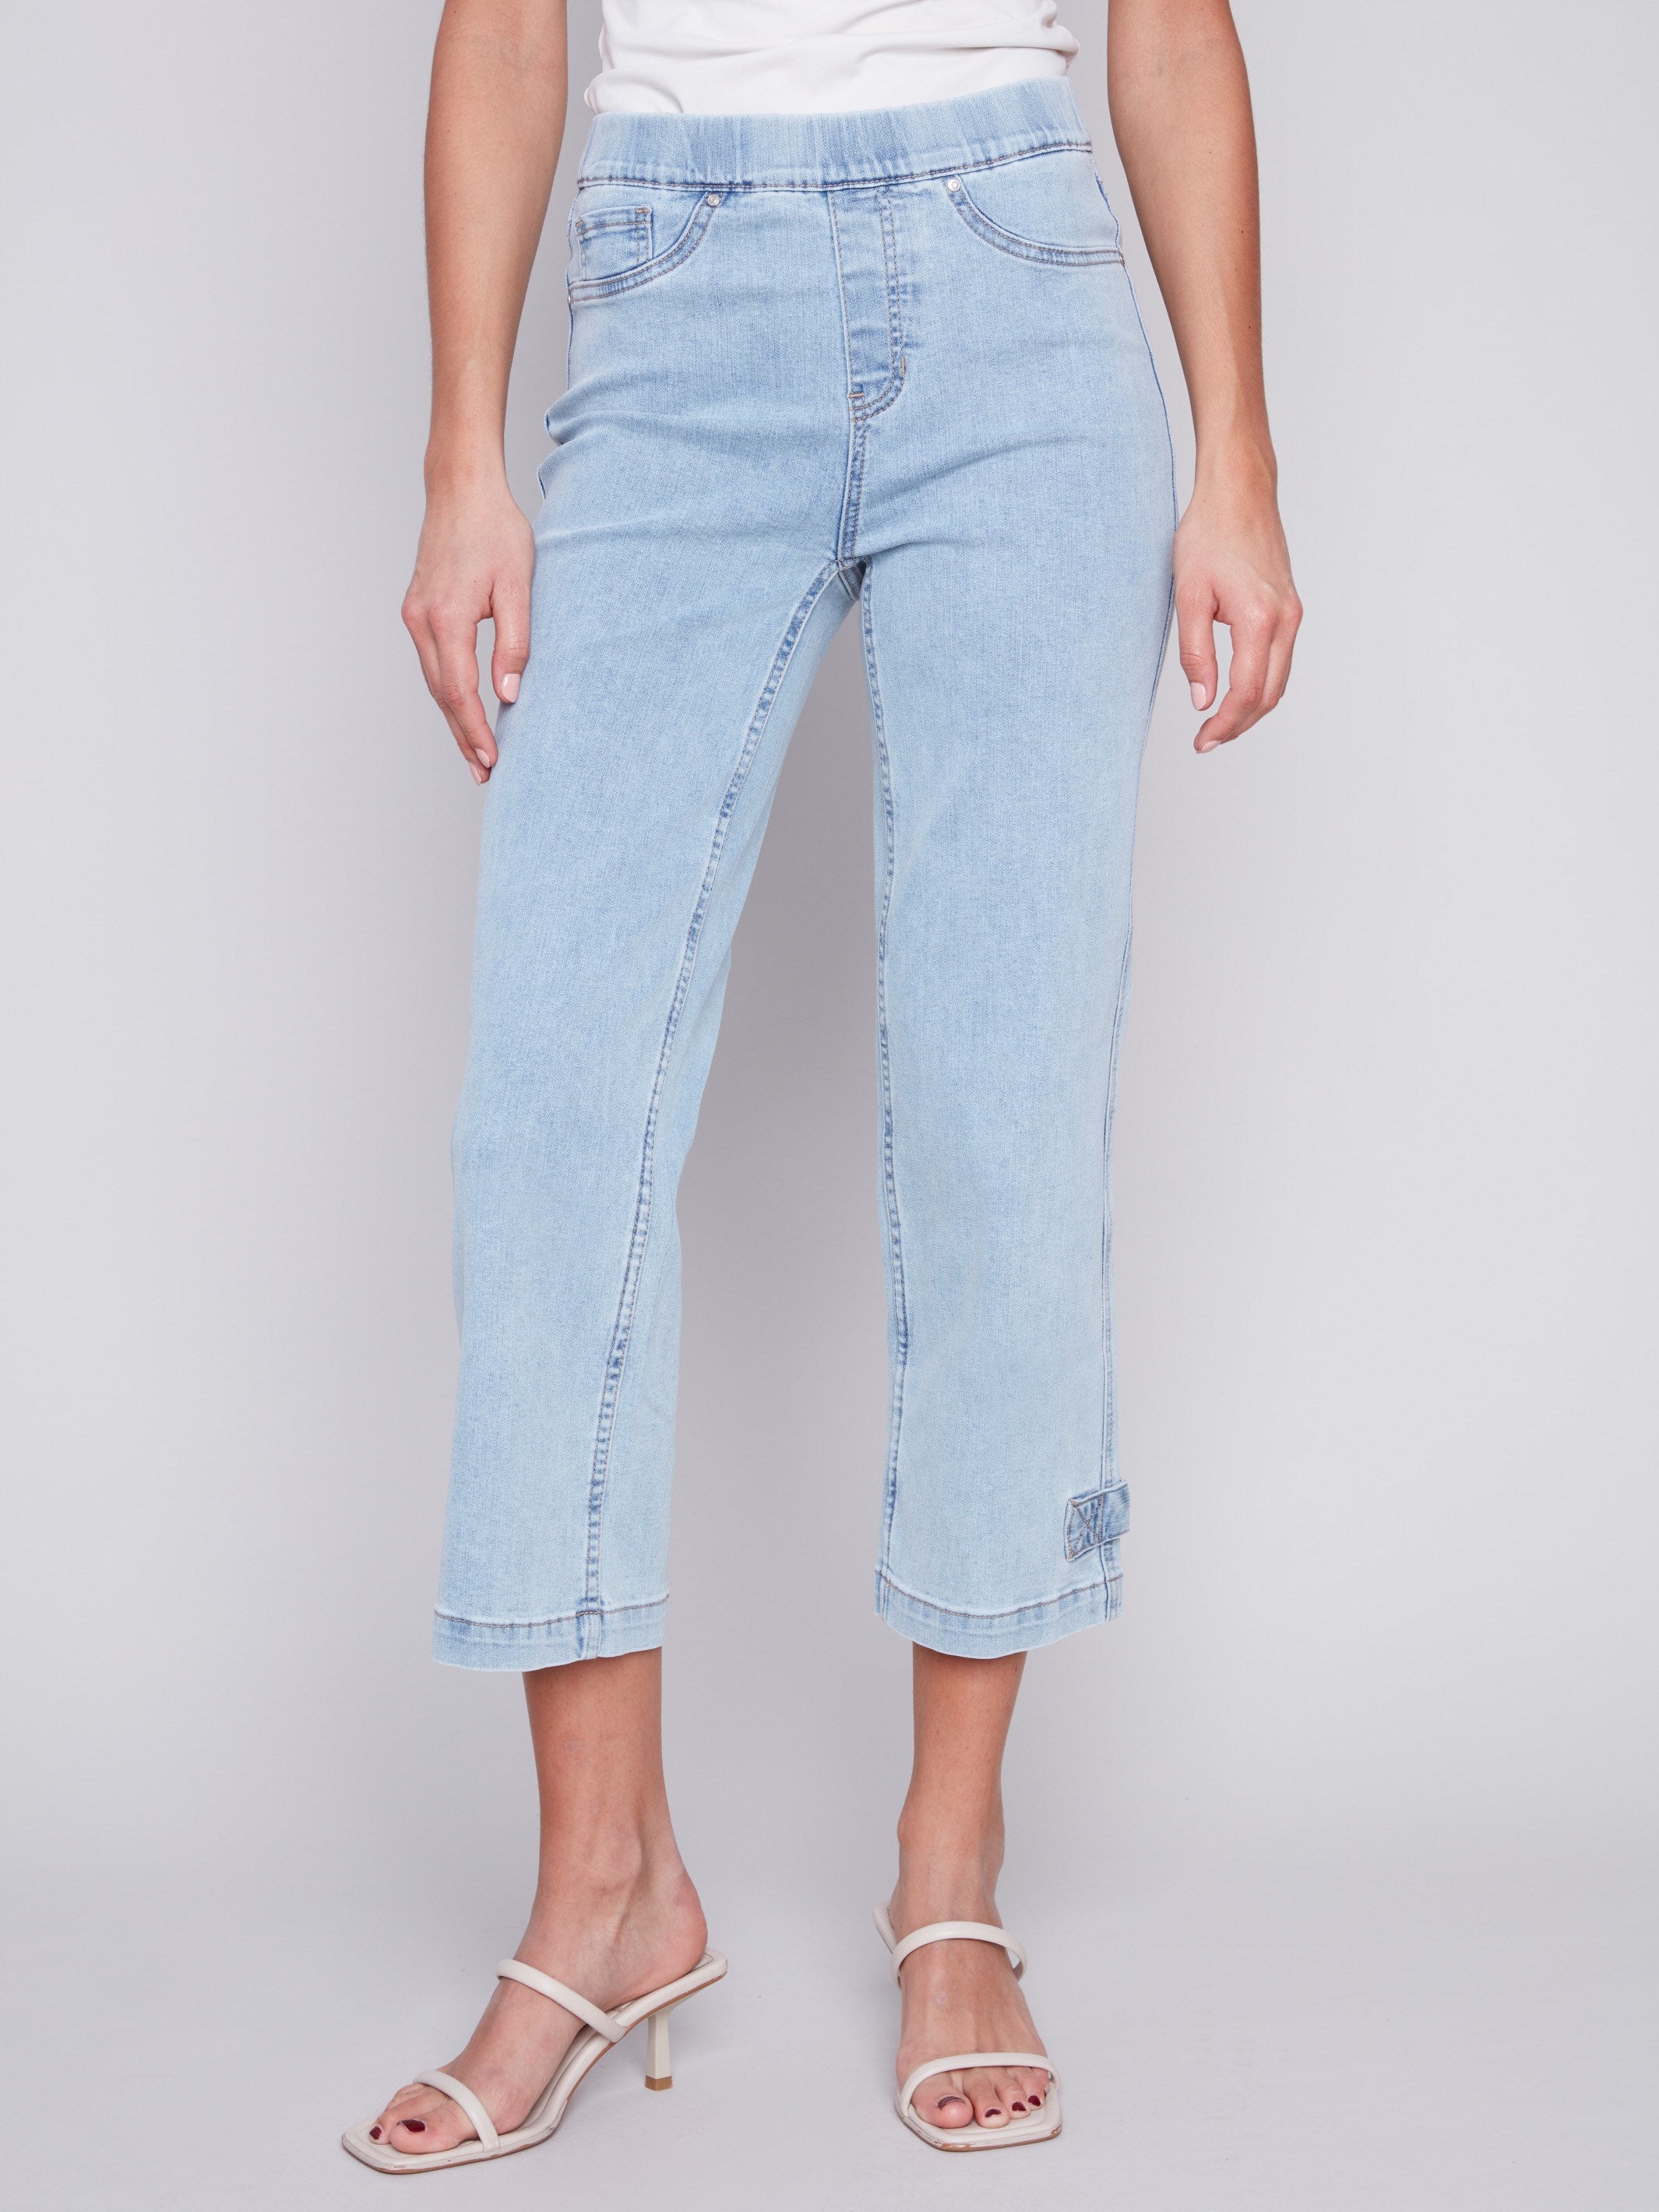 Cropped Pull-On Jeans with Hem Tab - Bleach Blue